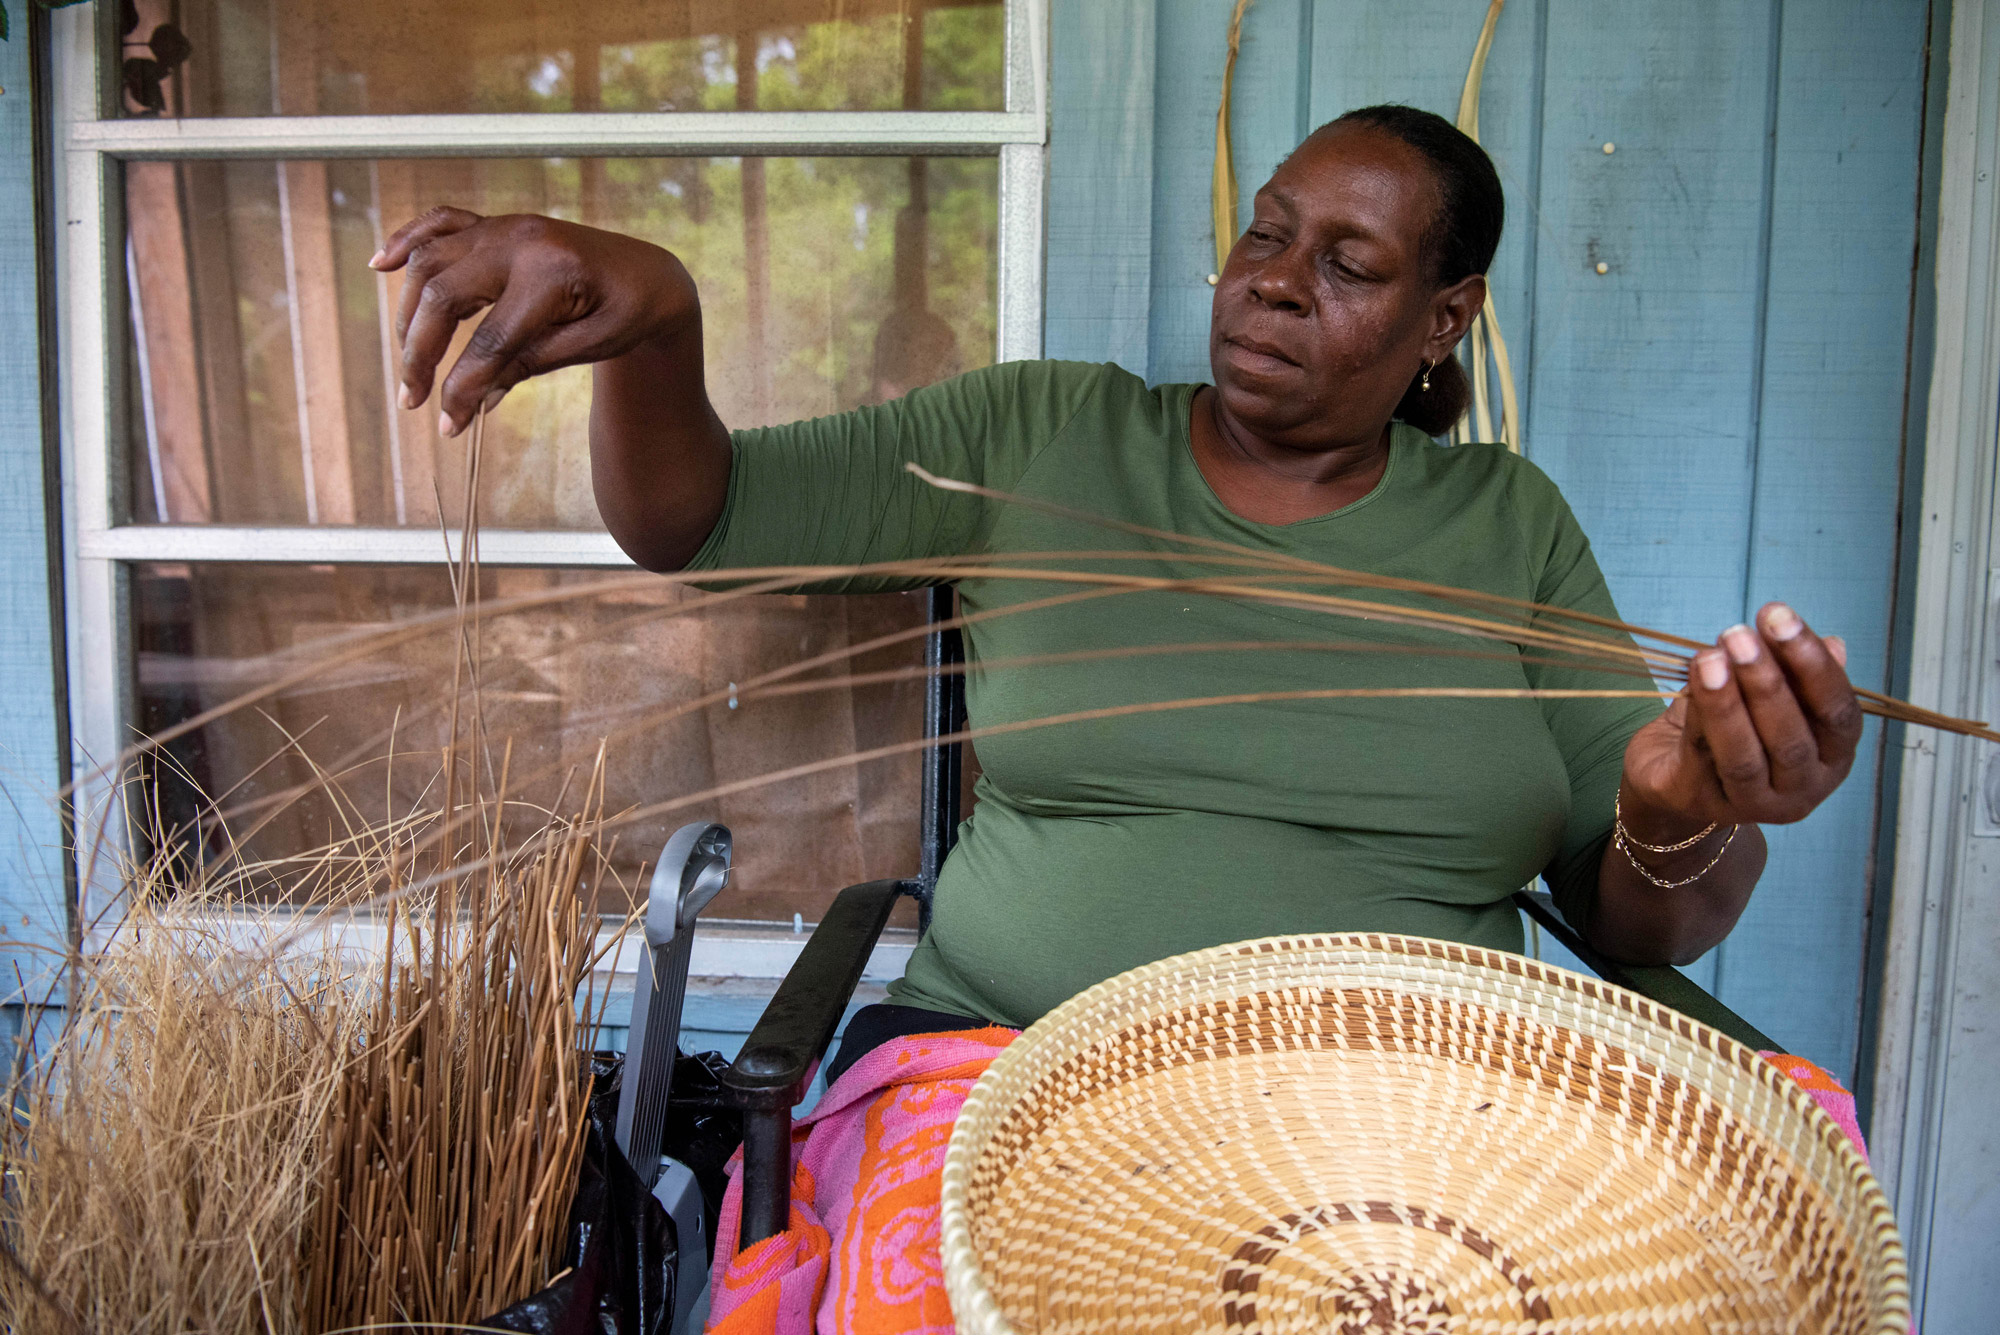 Women sweetgrass weavers making a bowl out of grass